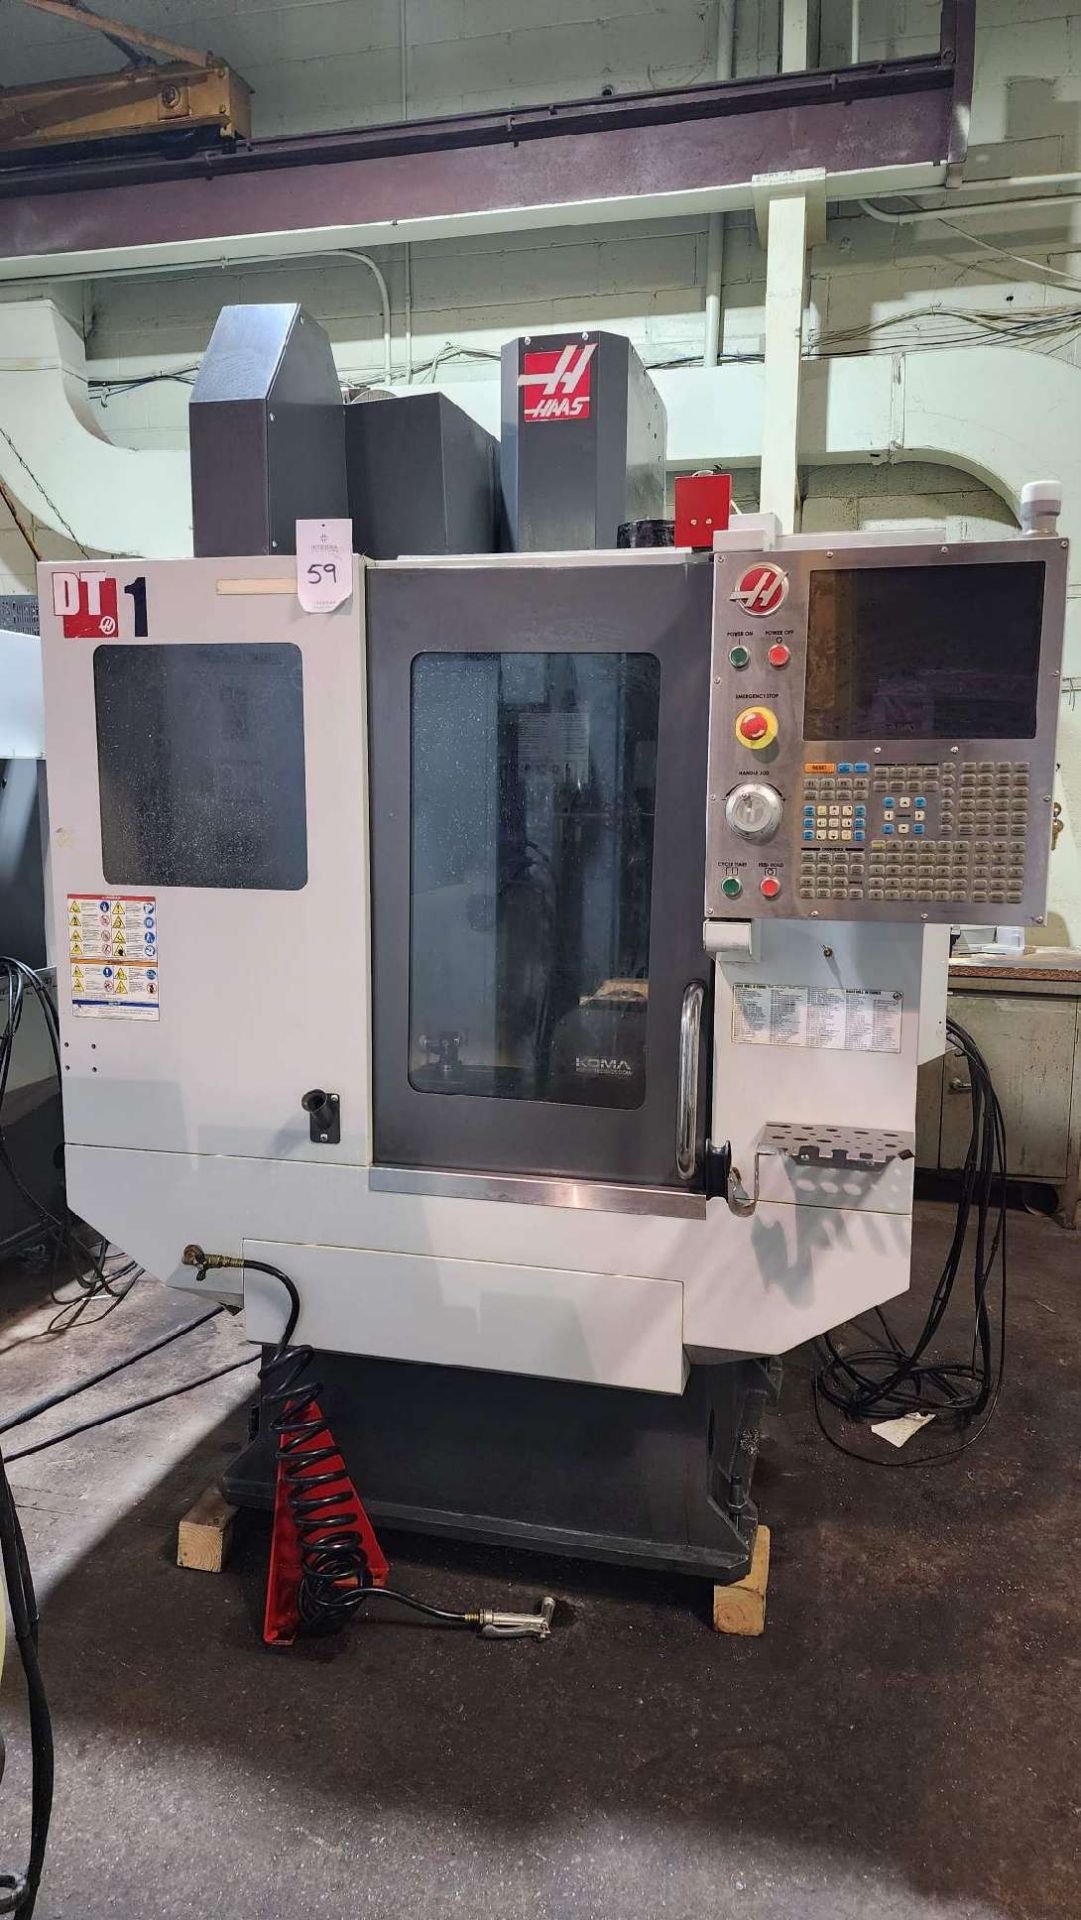 Haas DT-1 5-Axis CNC Drilling & Tapping Machine, S/N 1123539, 2015